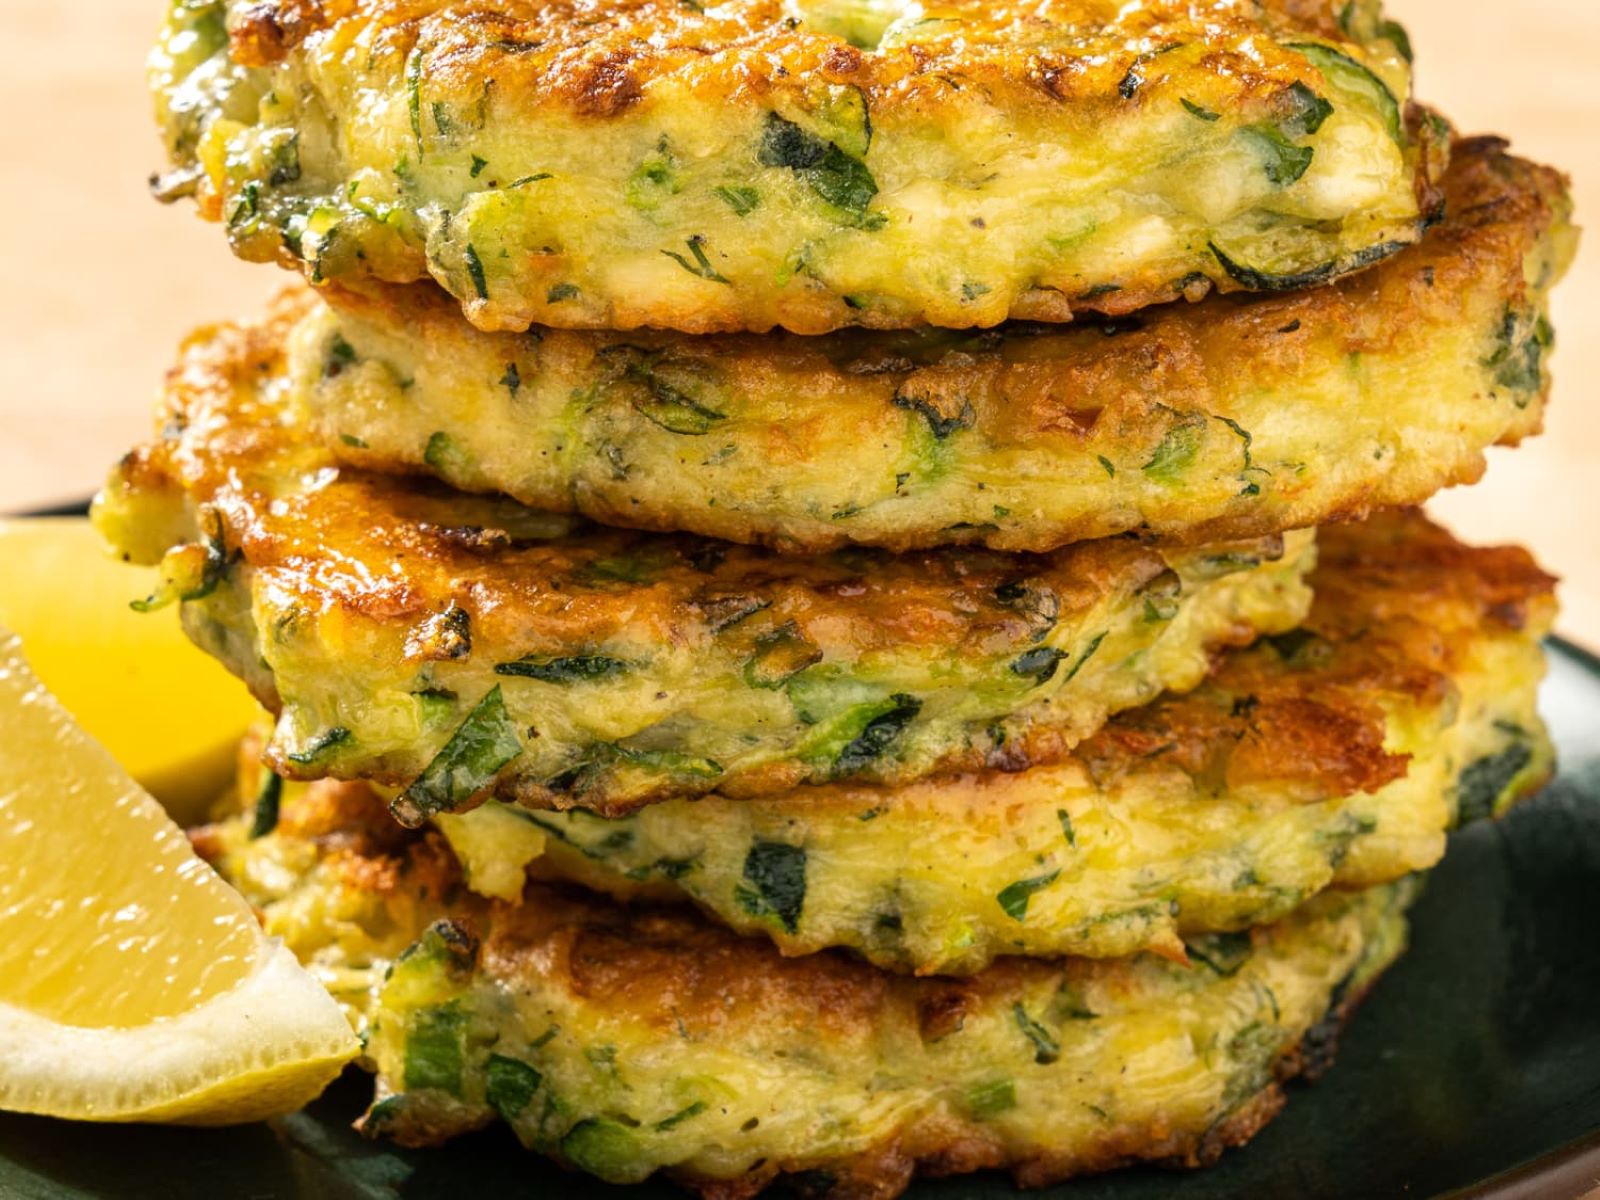 Healthy And Tasty Zucchini Pancakes Recipe For A Vegetarian Meal